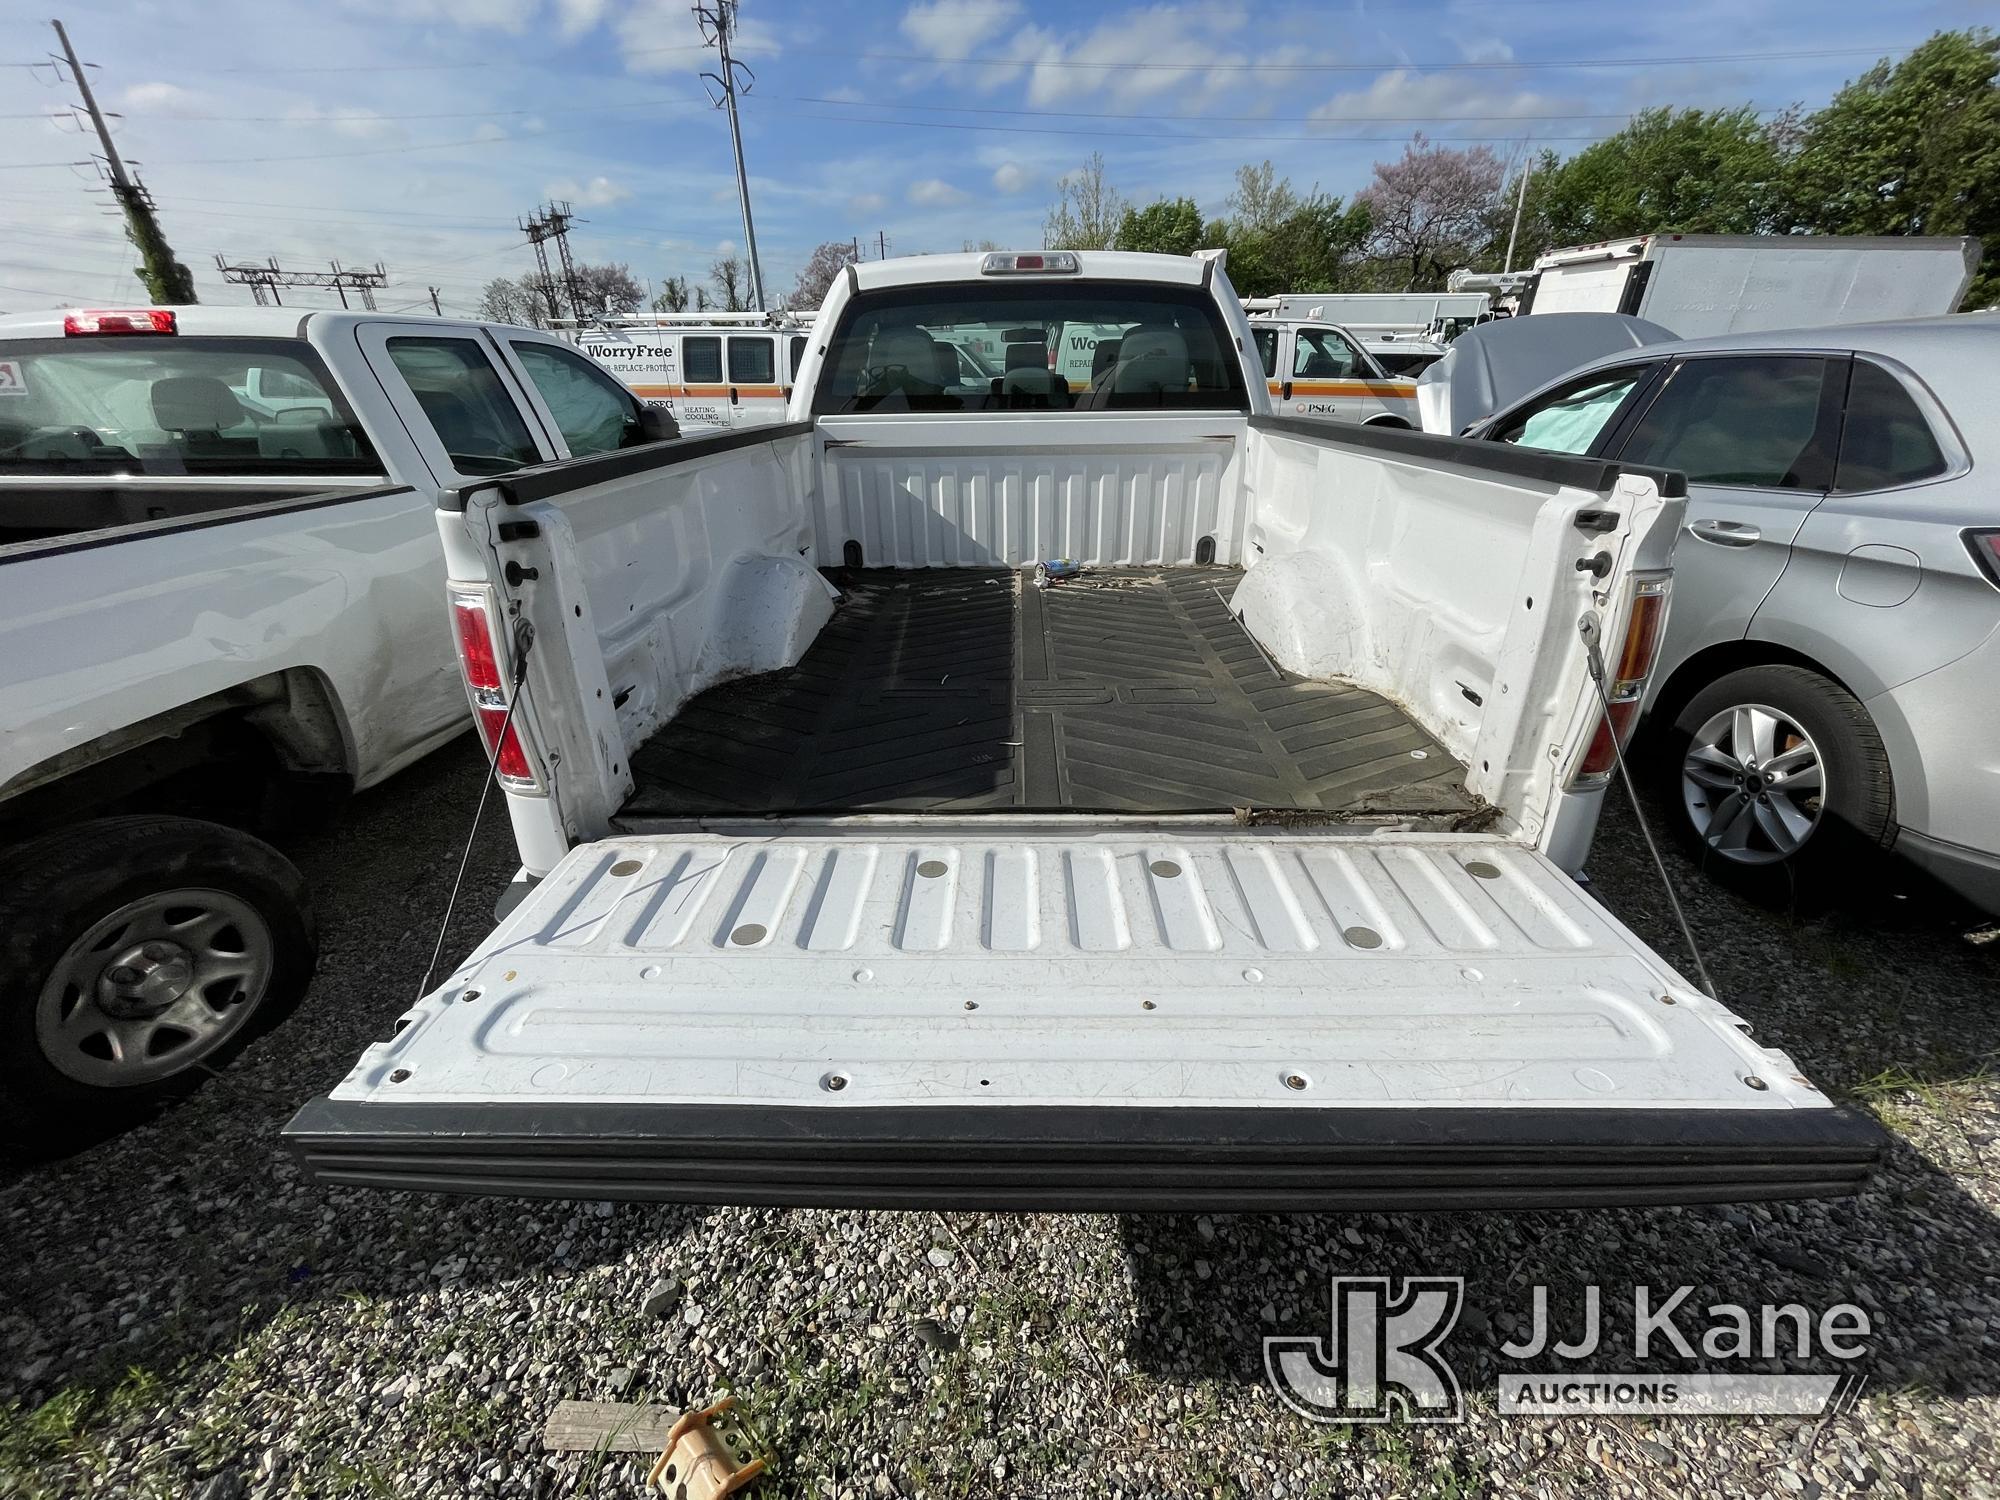 (Plymouth Meeting, PA) 2014 Ford F150 4x4 Extended-Cab Pickup Truck Not Running, Condition Unknown,